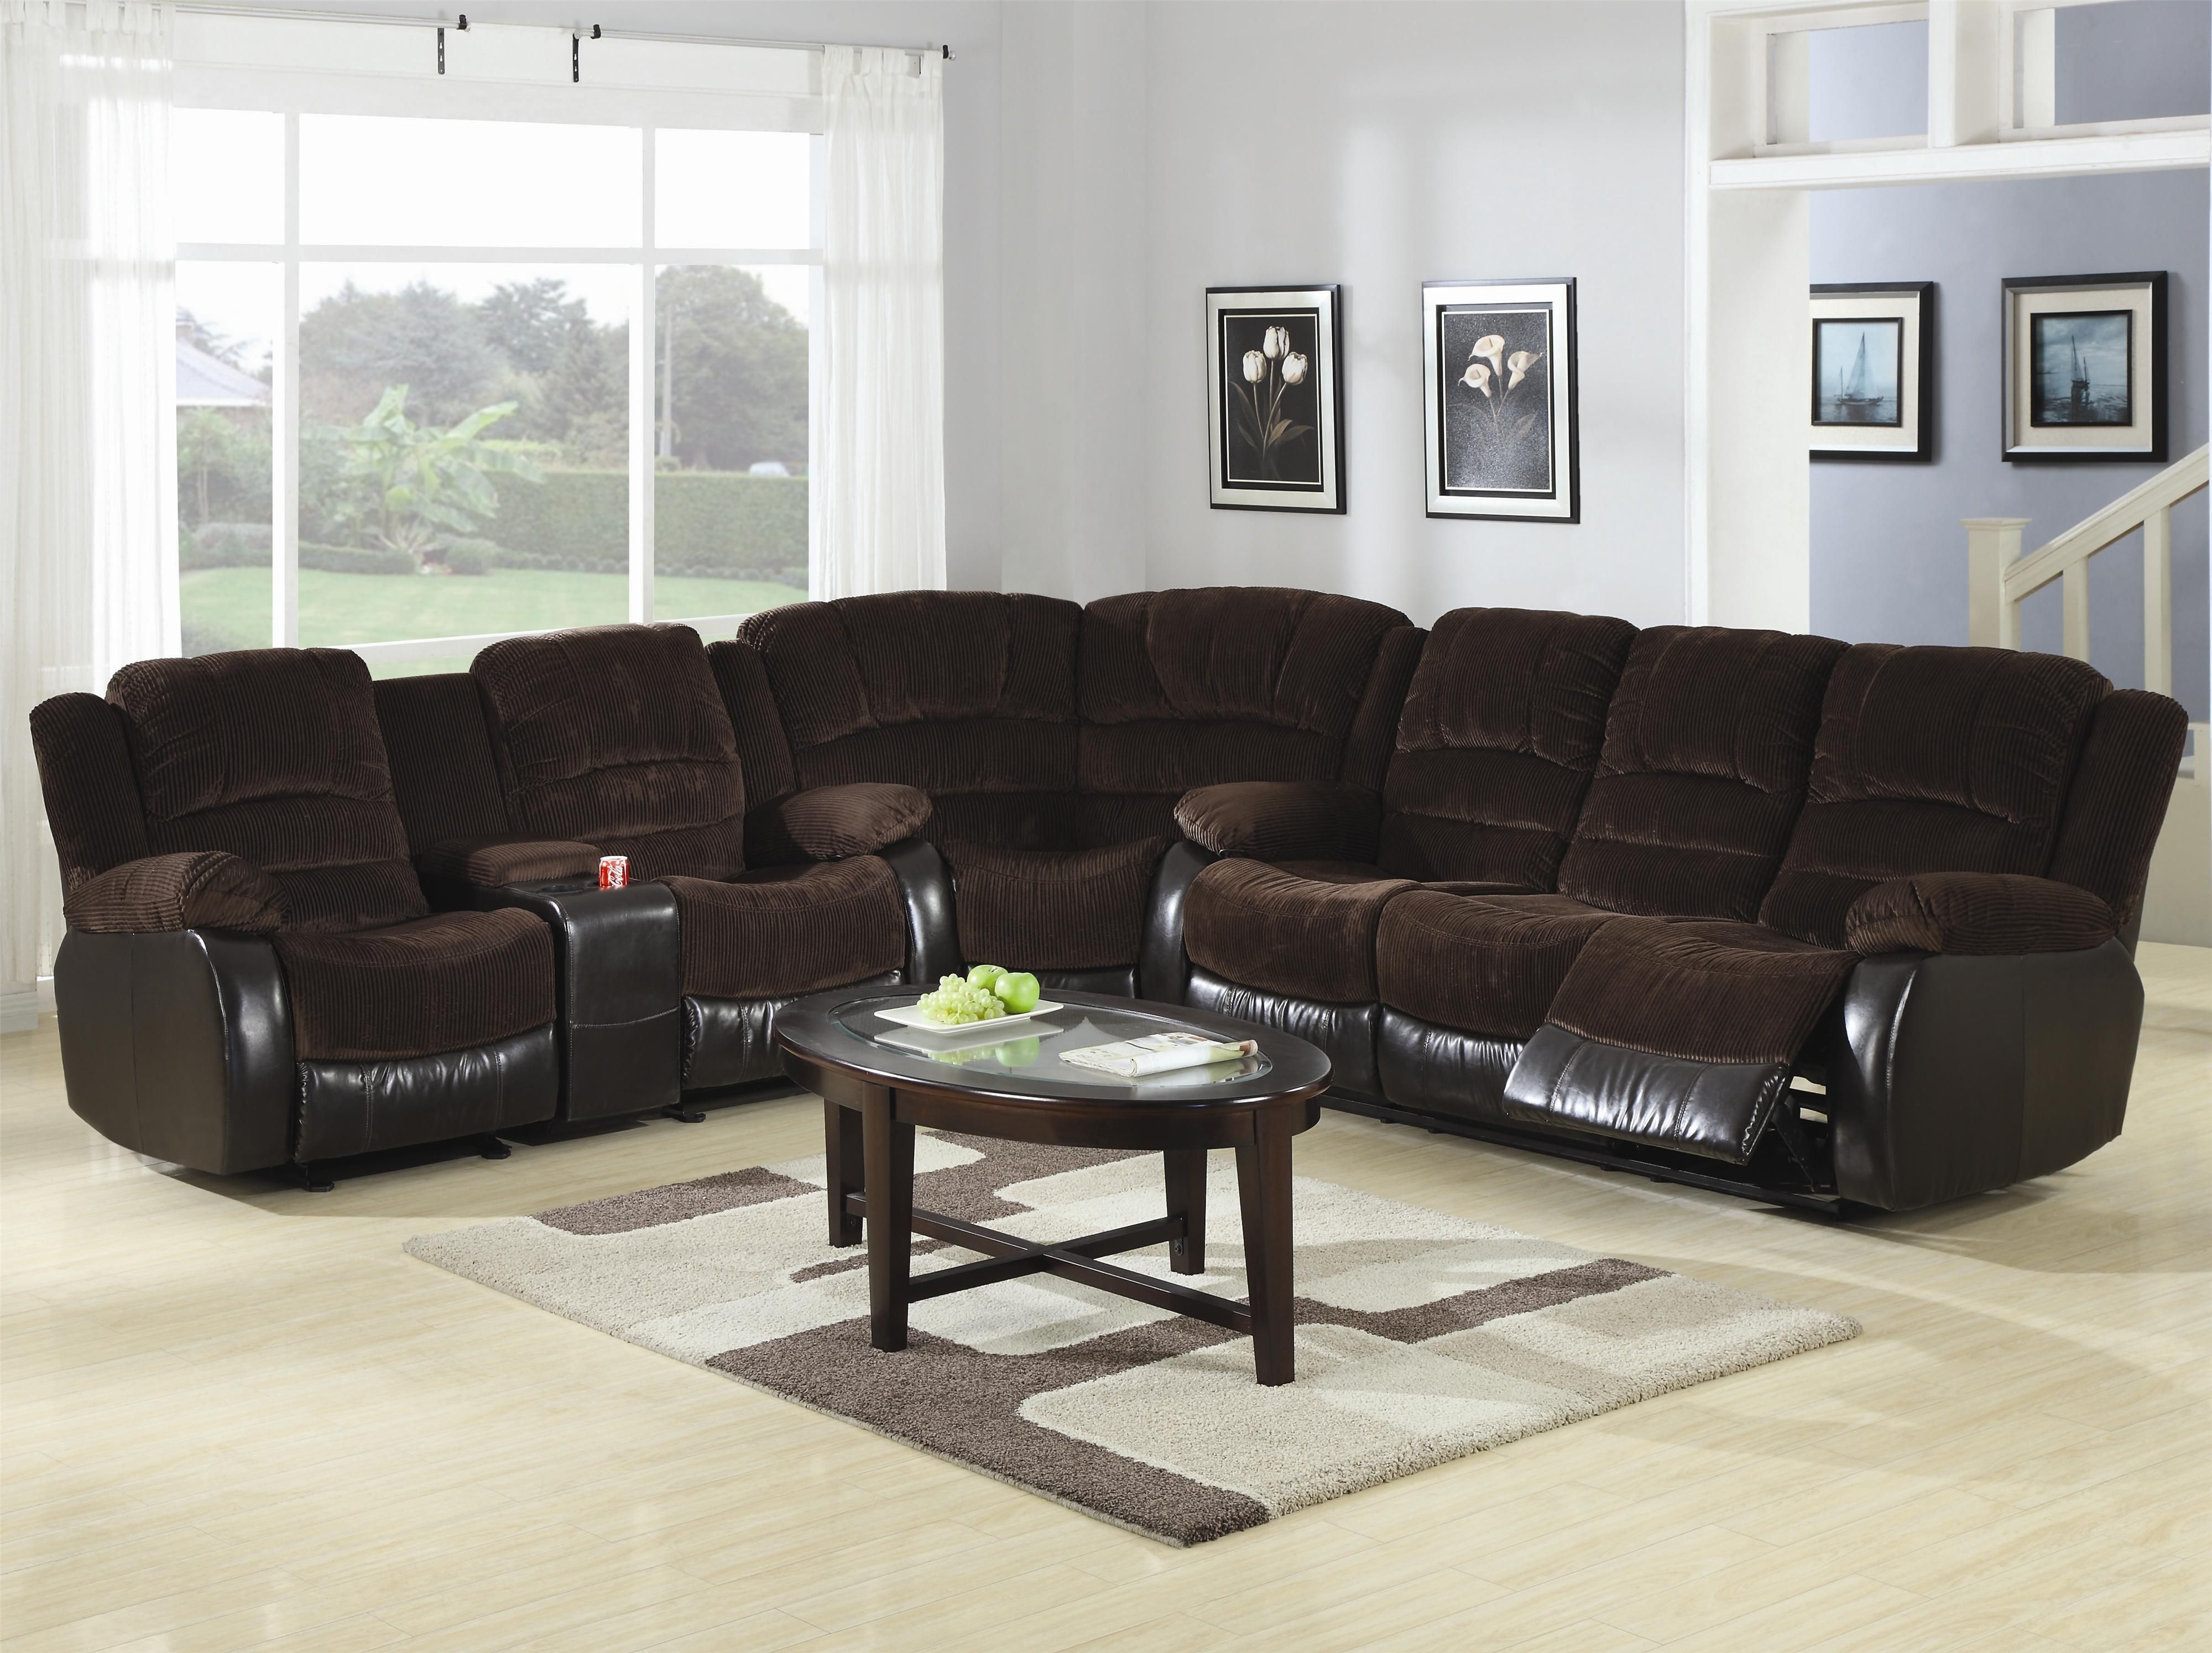 Simple Tables For Sectional Sofas 79 On Target Sectional Sofa With In Target Sectional Sofas (View 10 of 10)